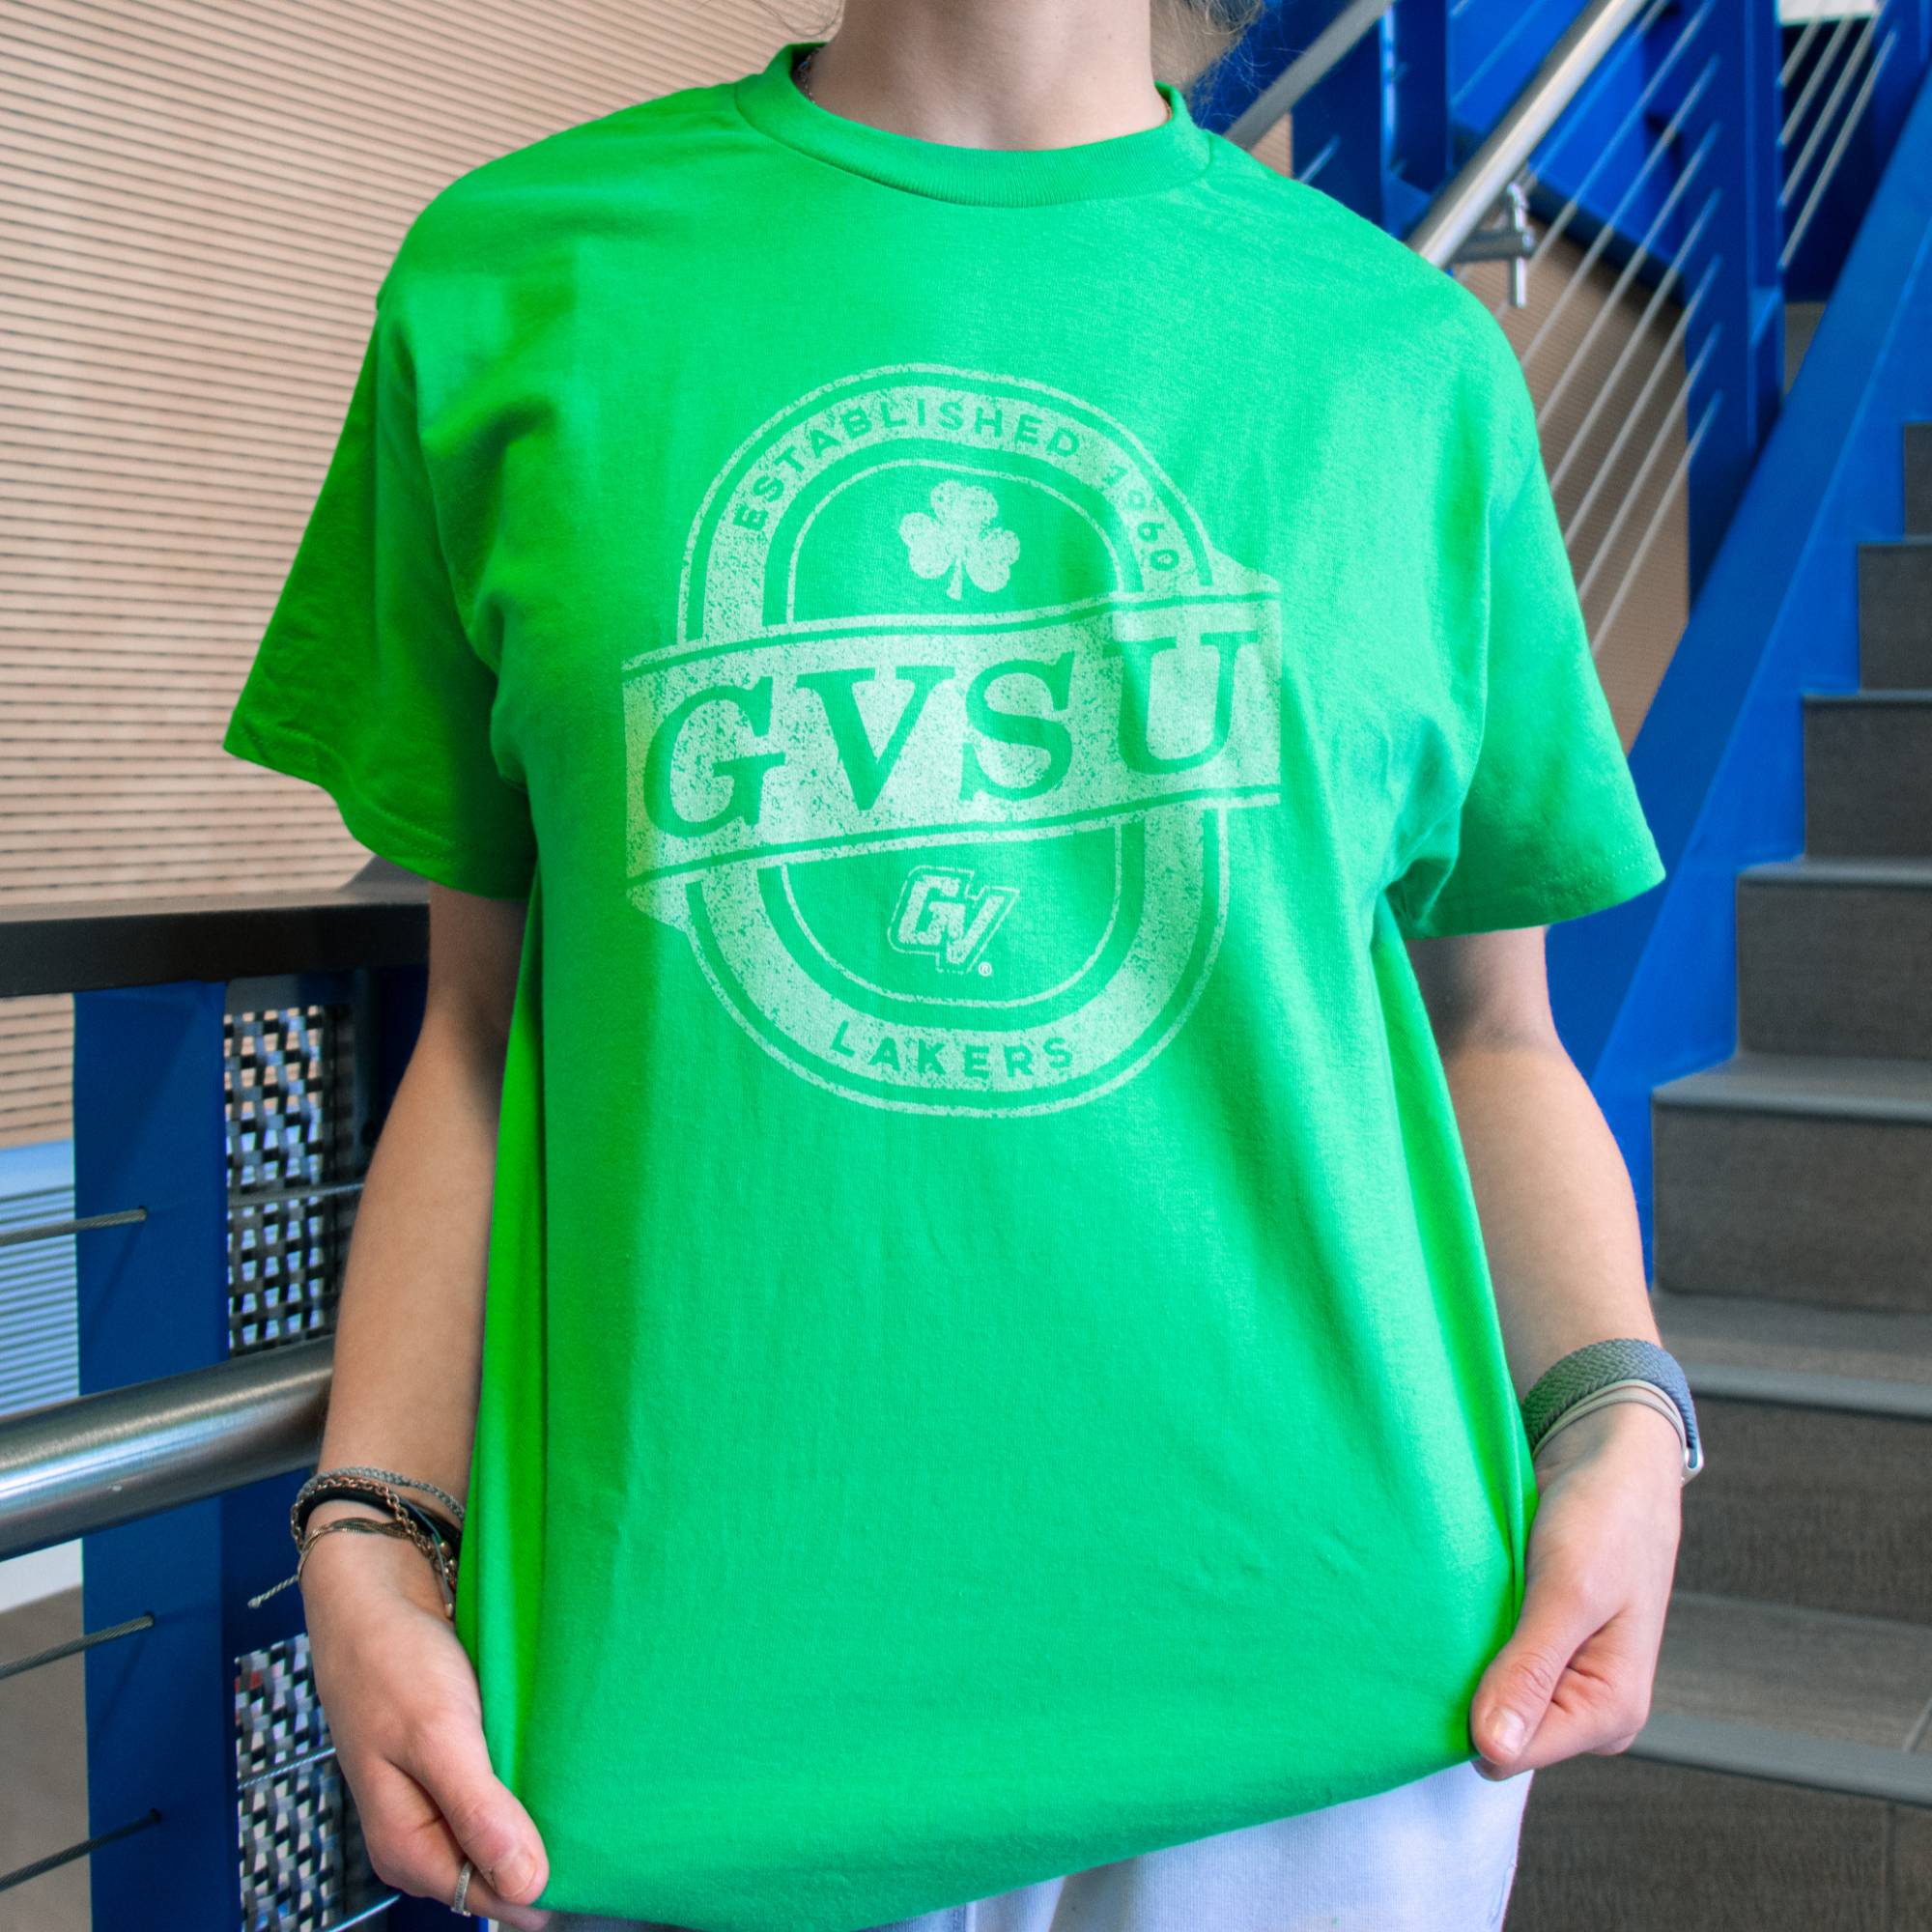 student modeling a green St. Patrick's day t-shirt